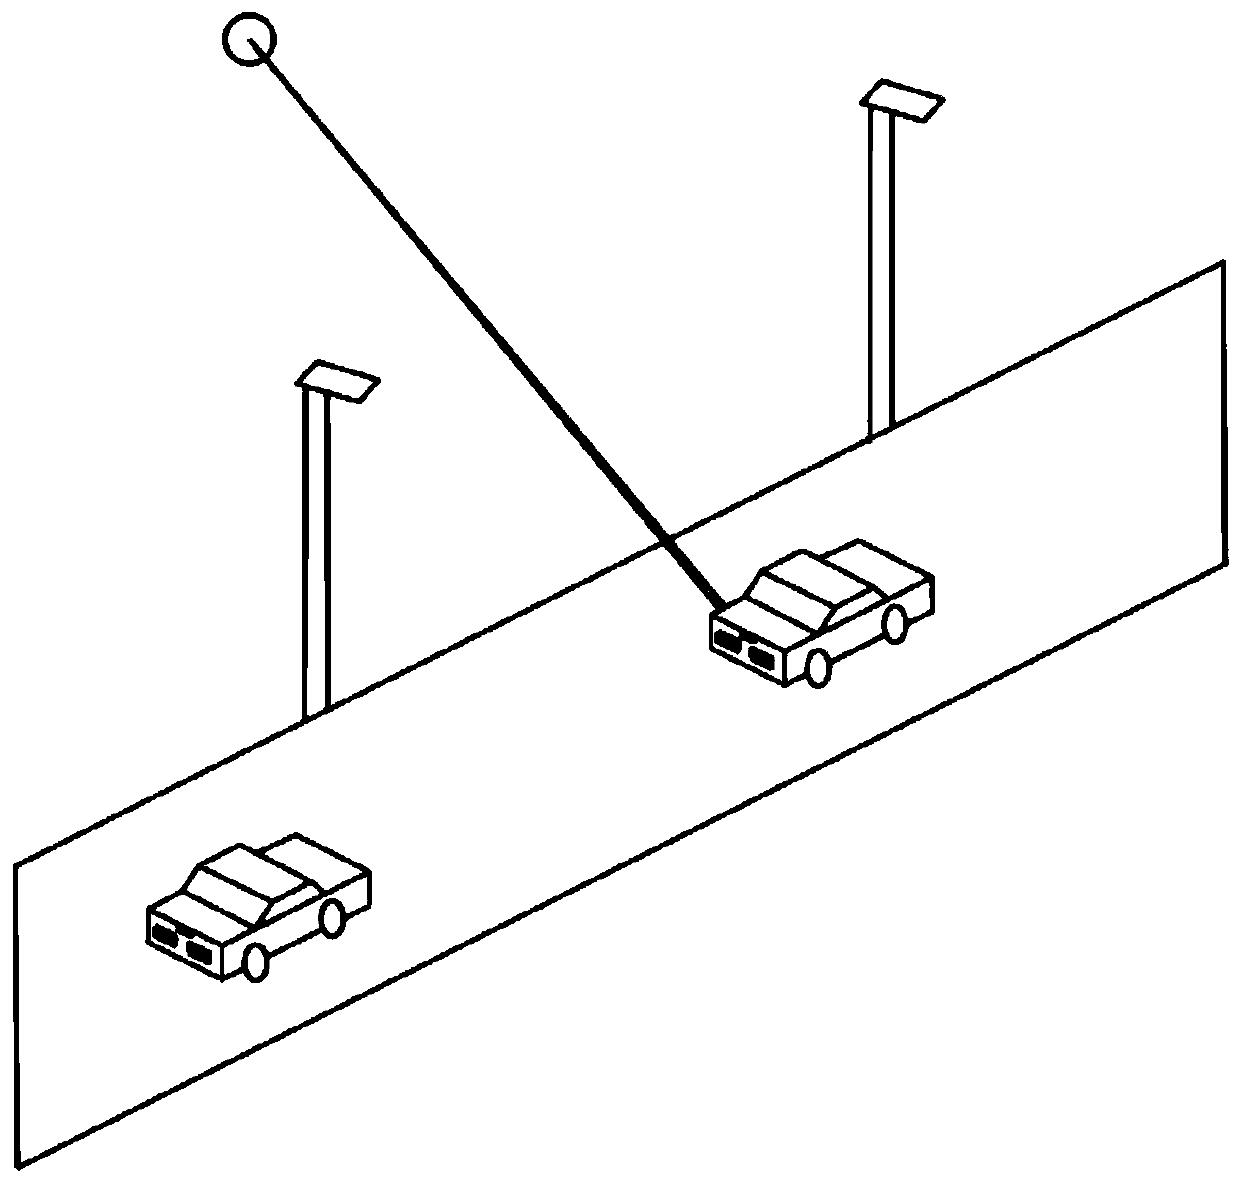 Vehicle-mounted visible light communication receiving end device based on a photovoltaic cell